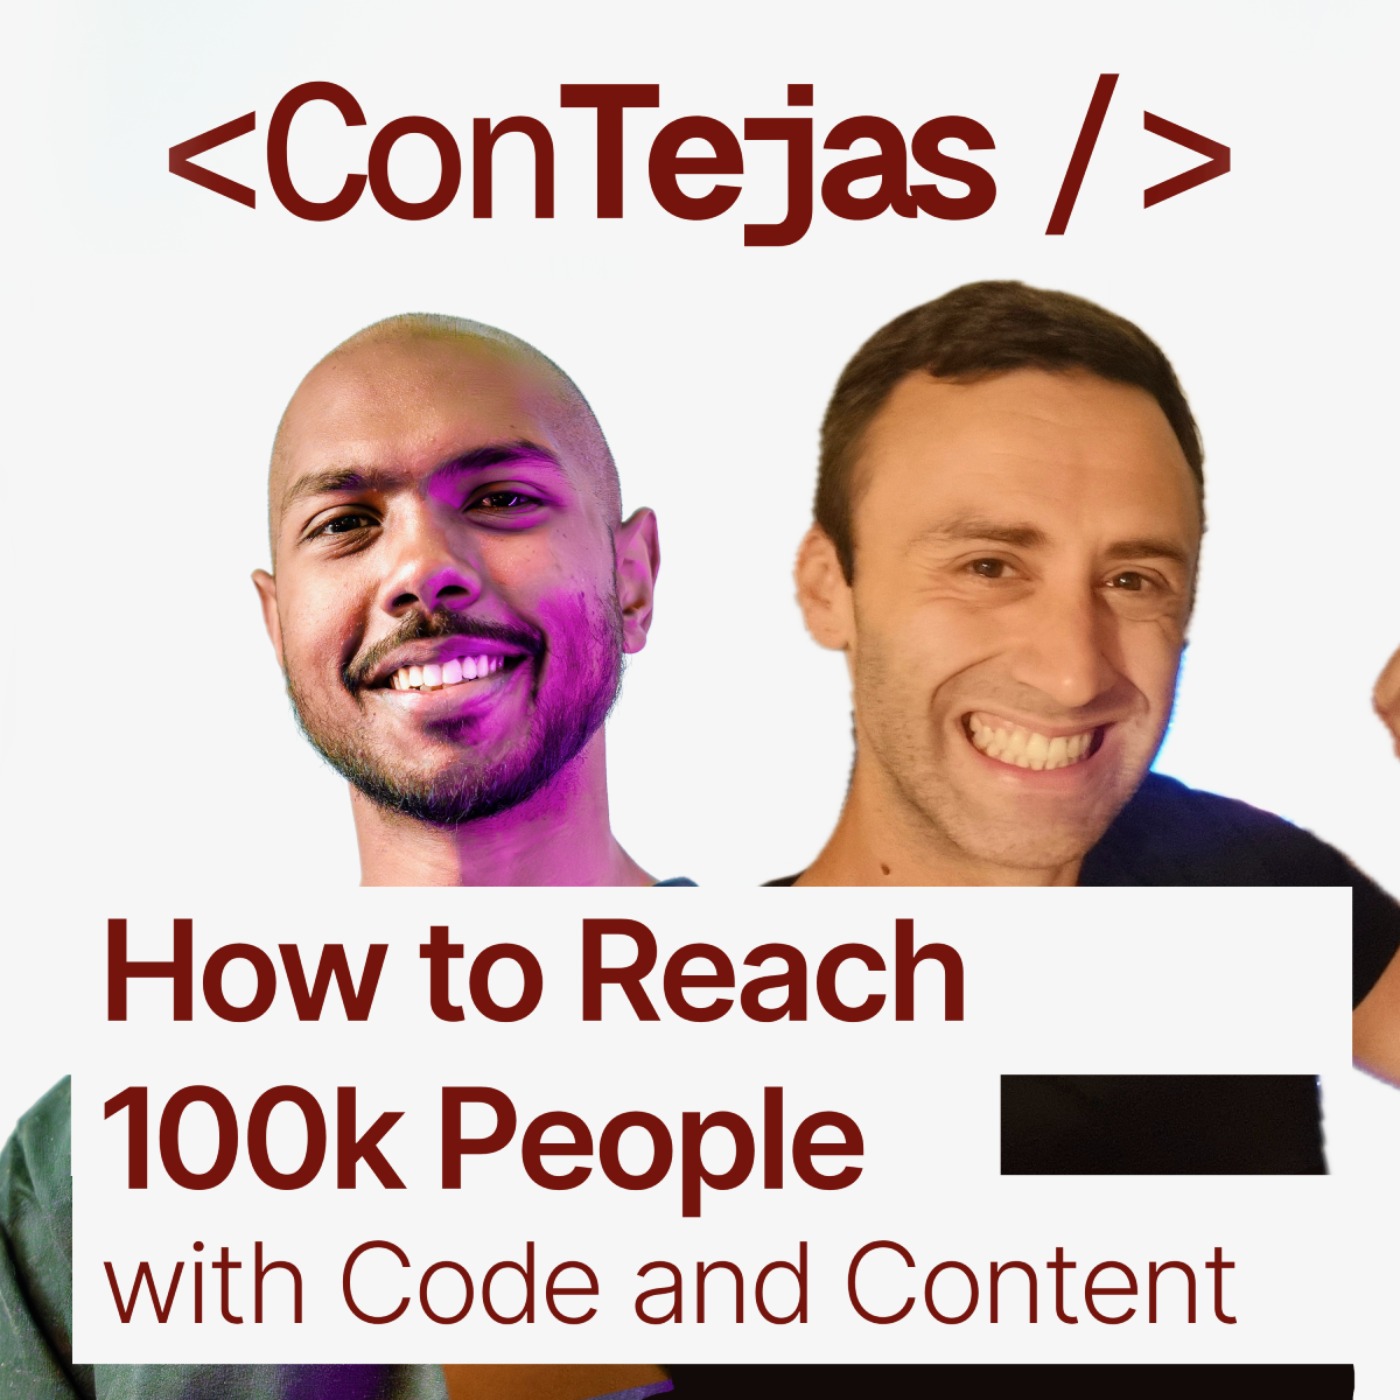 Francesco Ciulla: How to Reach 100k+ People with Code and Content